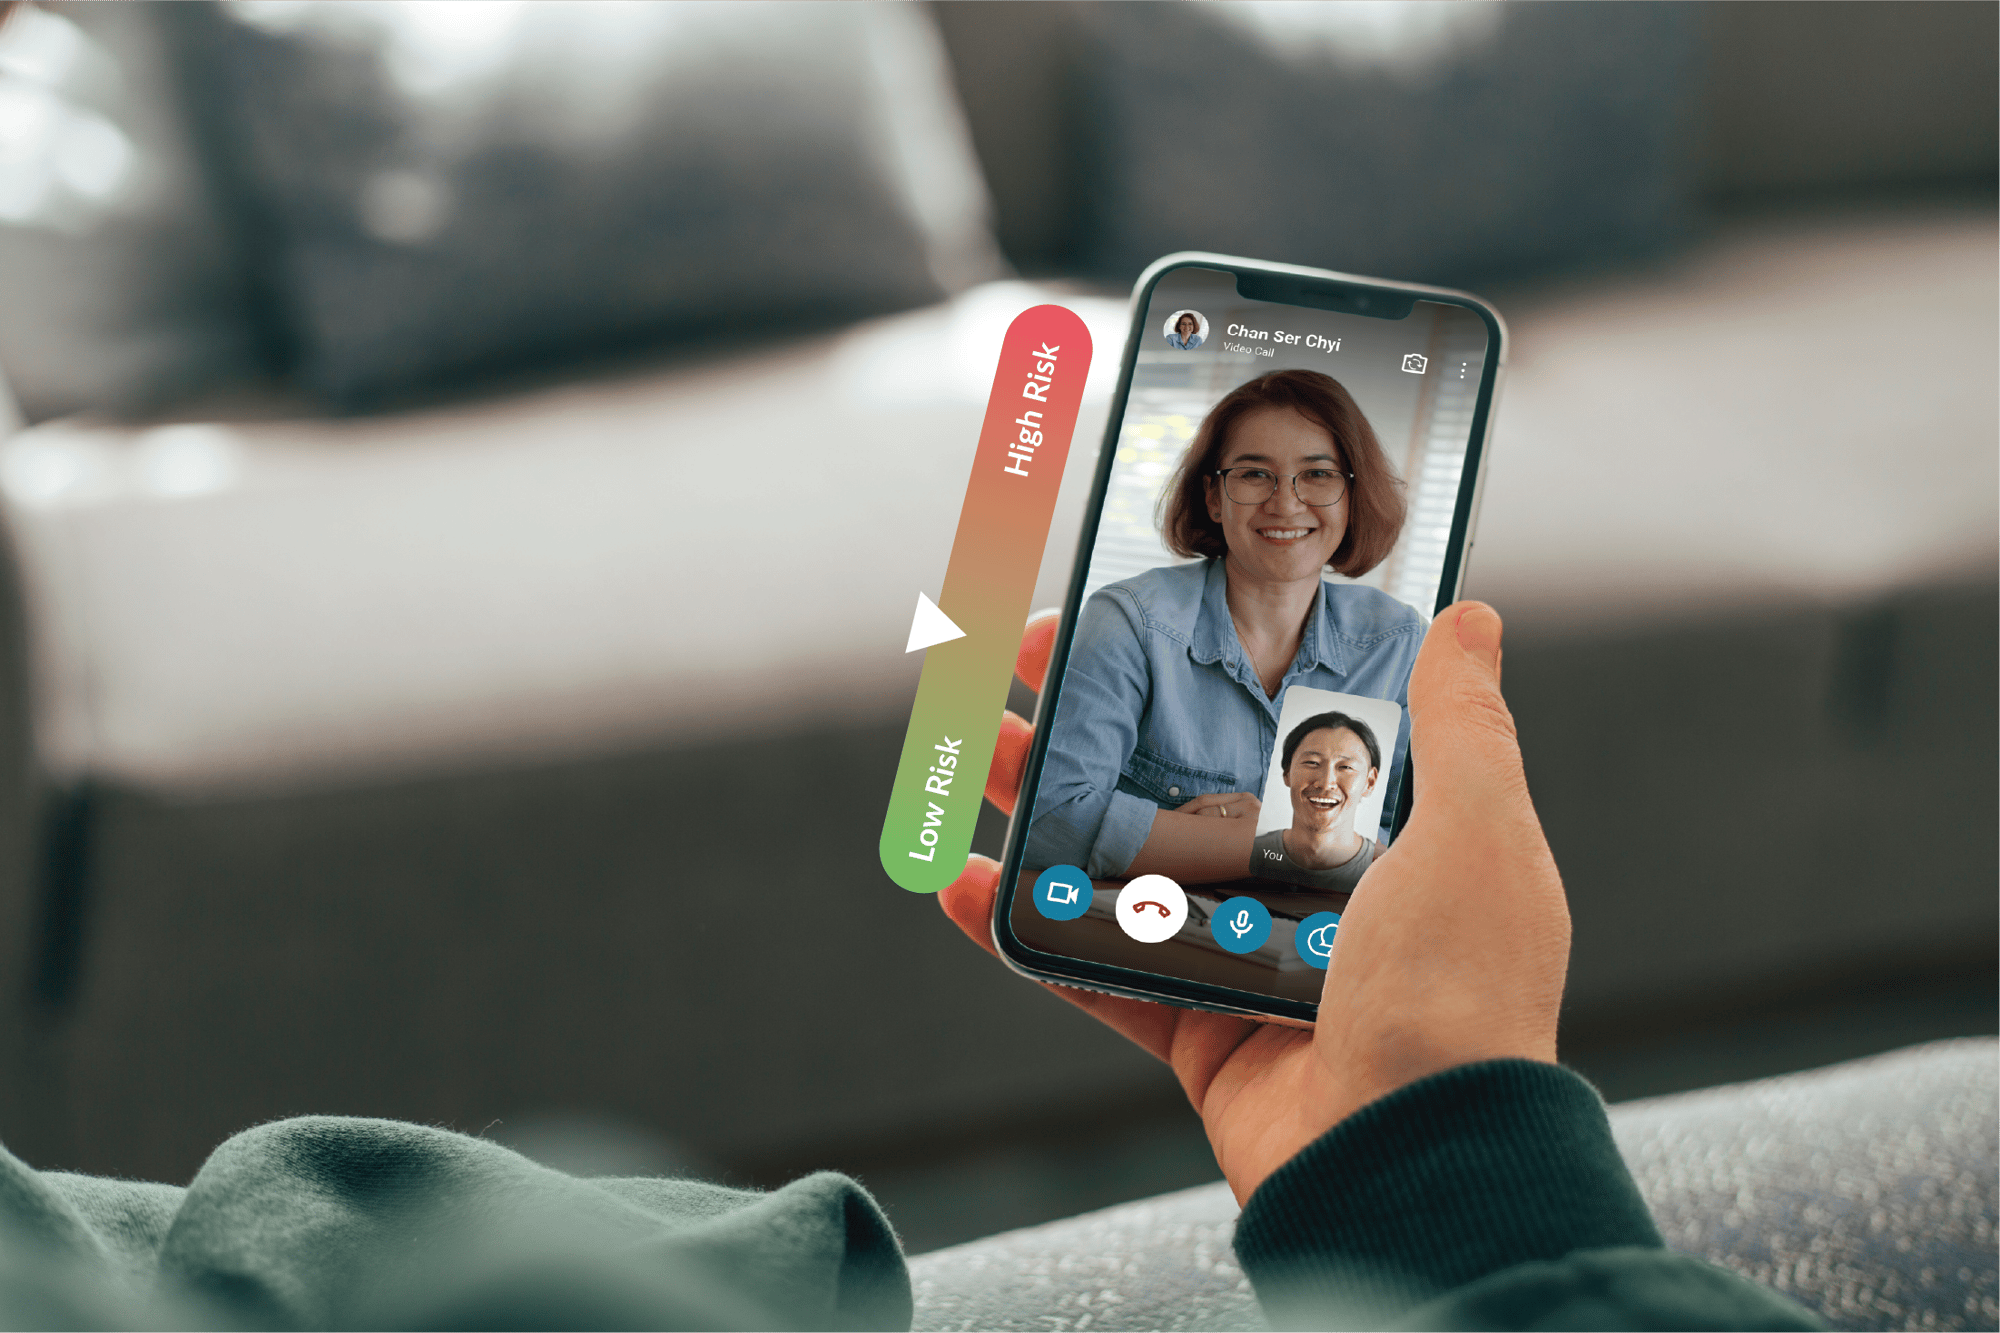 One-on-one remote therapy session via the Naluri app